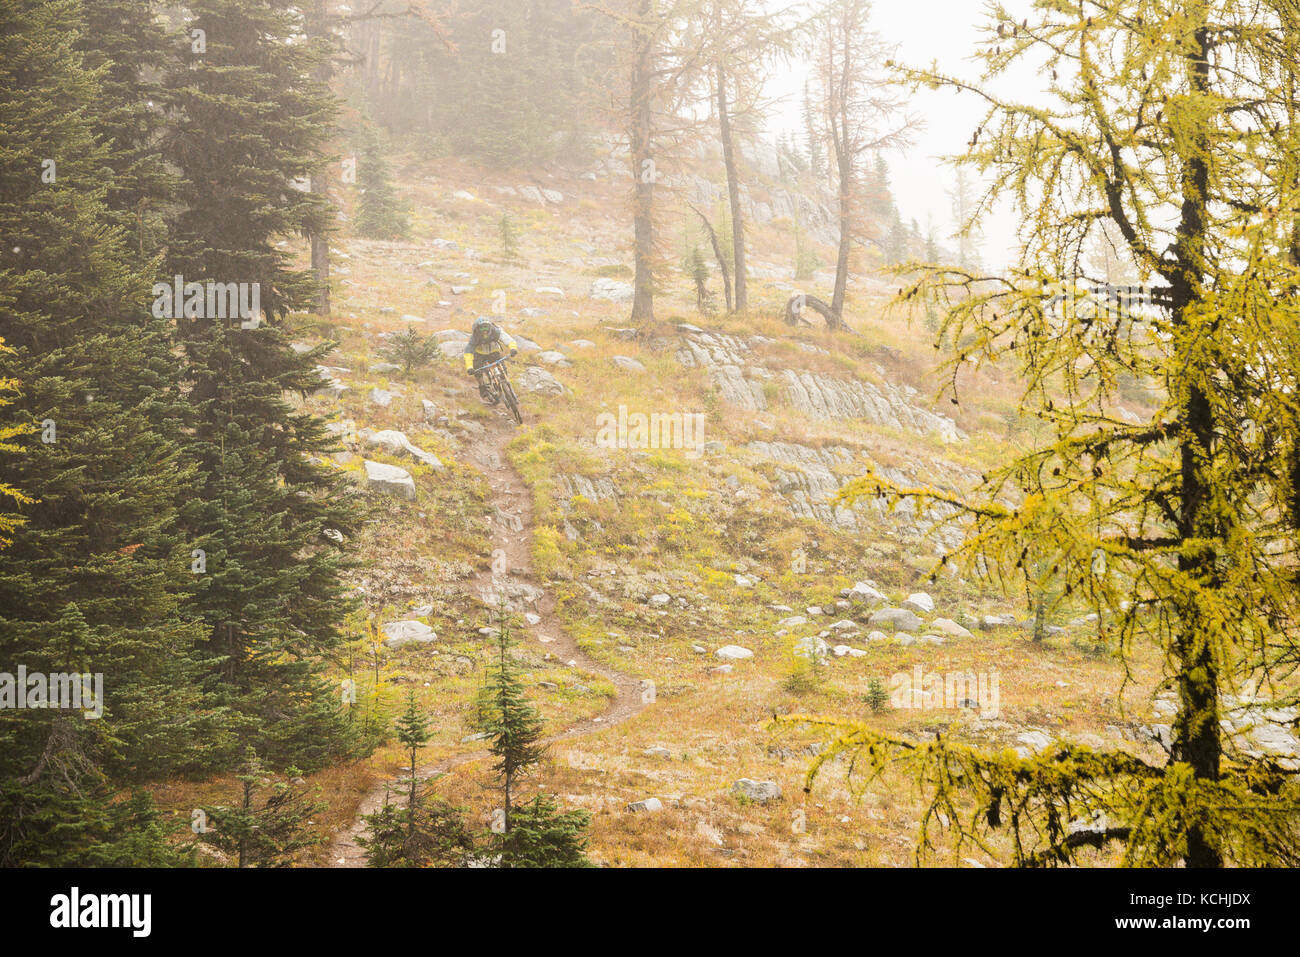 A mountain biker rides down a trail with fog and yellow larch trees at Jumbo Pass, British Columbia Stock Photo